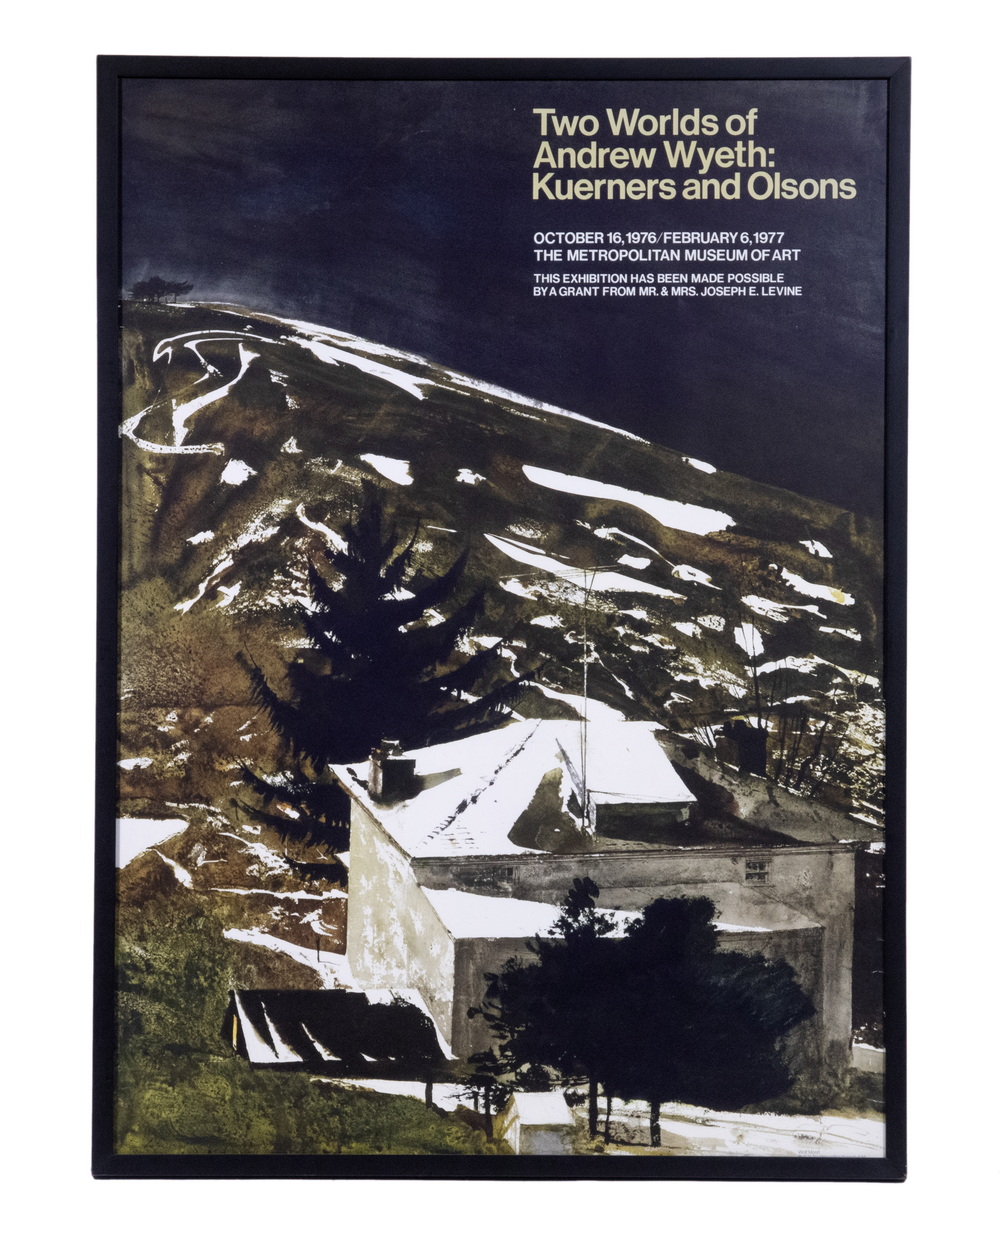 ANDREW WYETH EXHIBITION POSTER